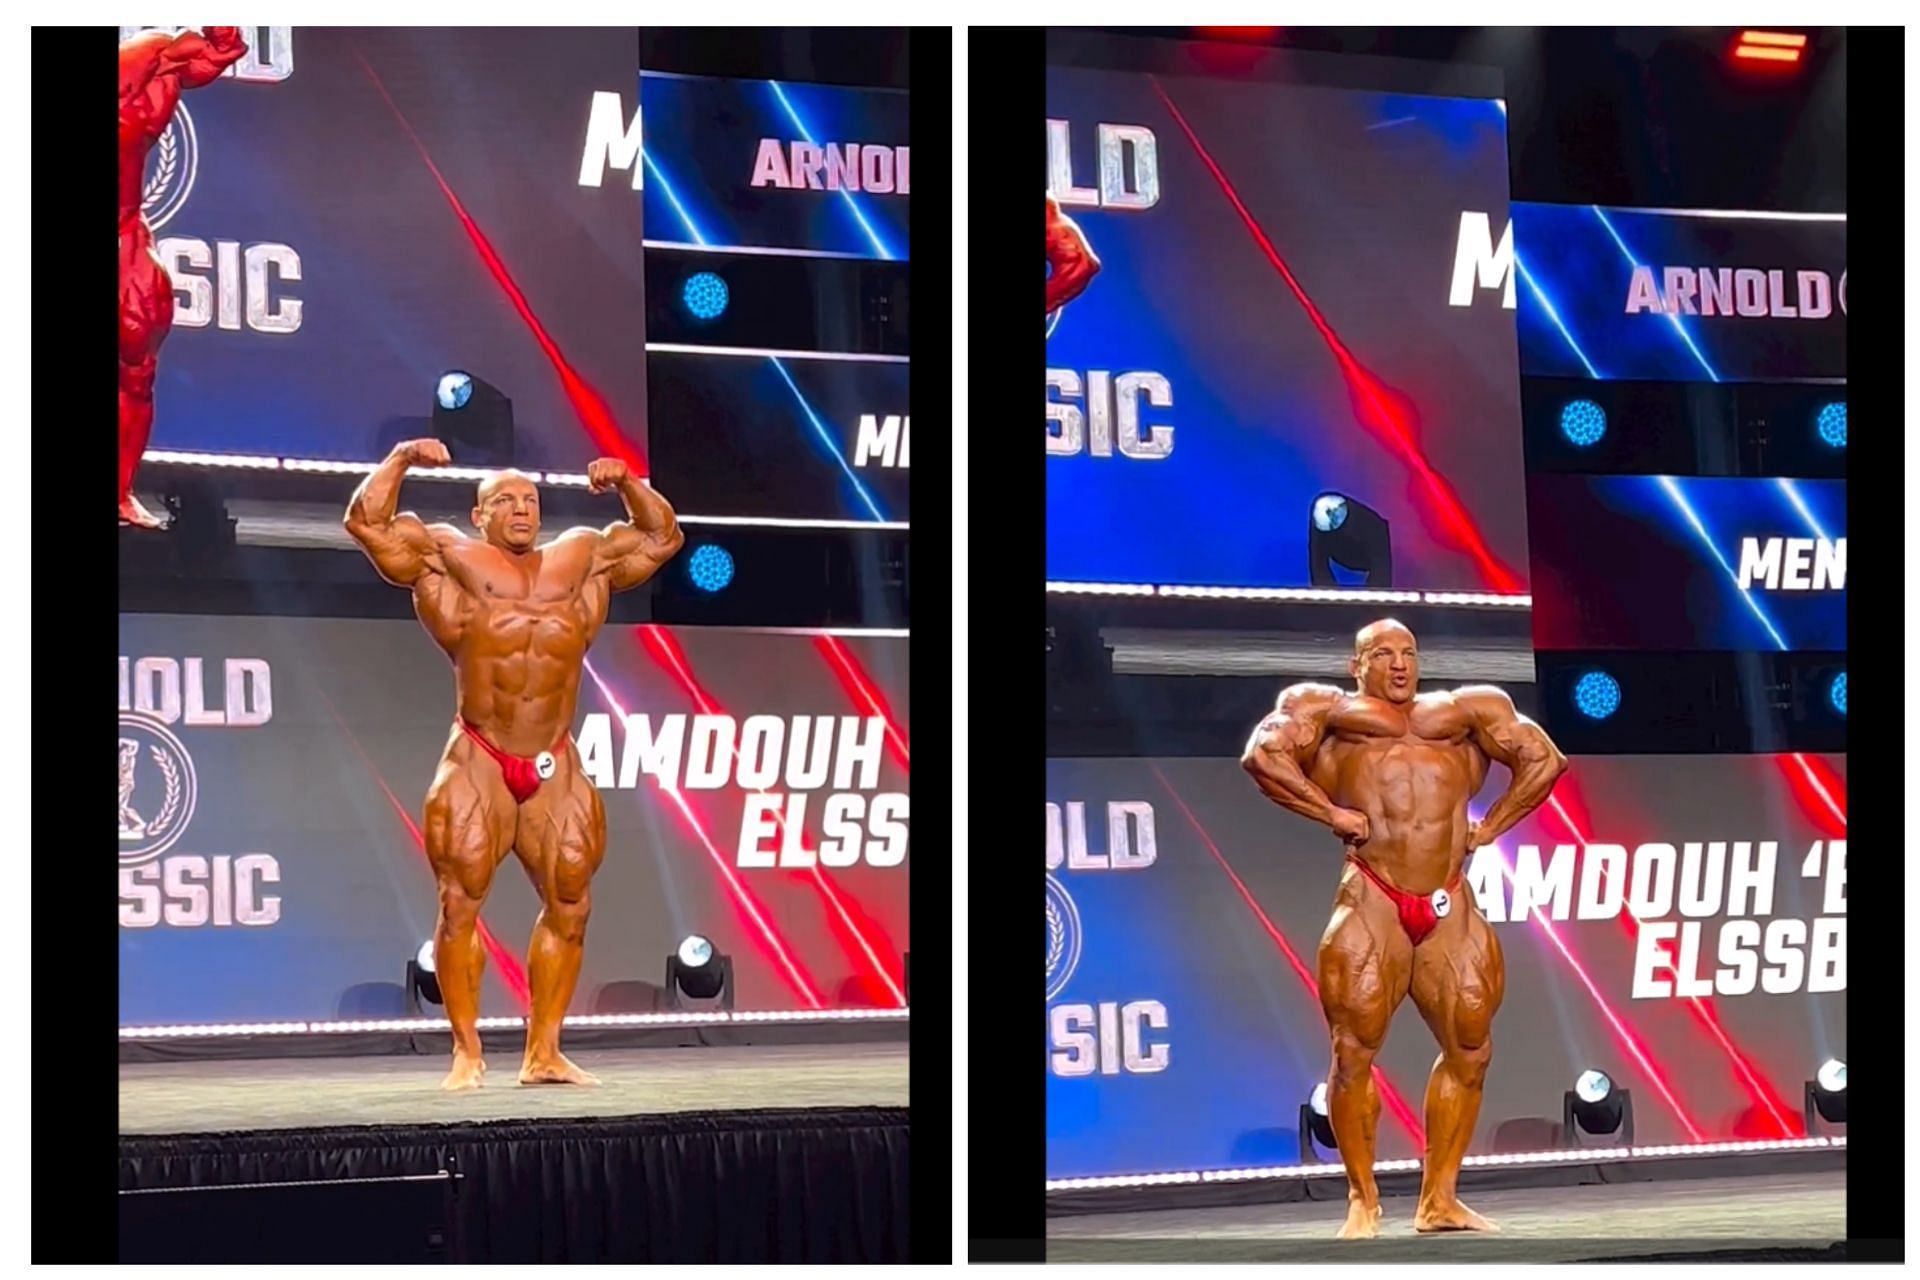 Big Ramy performs on stage at the 2023 Arnold Classic: Image via Instagram (@big_ramy)